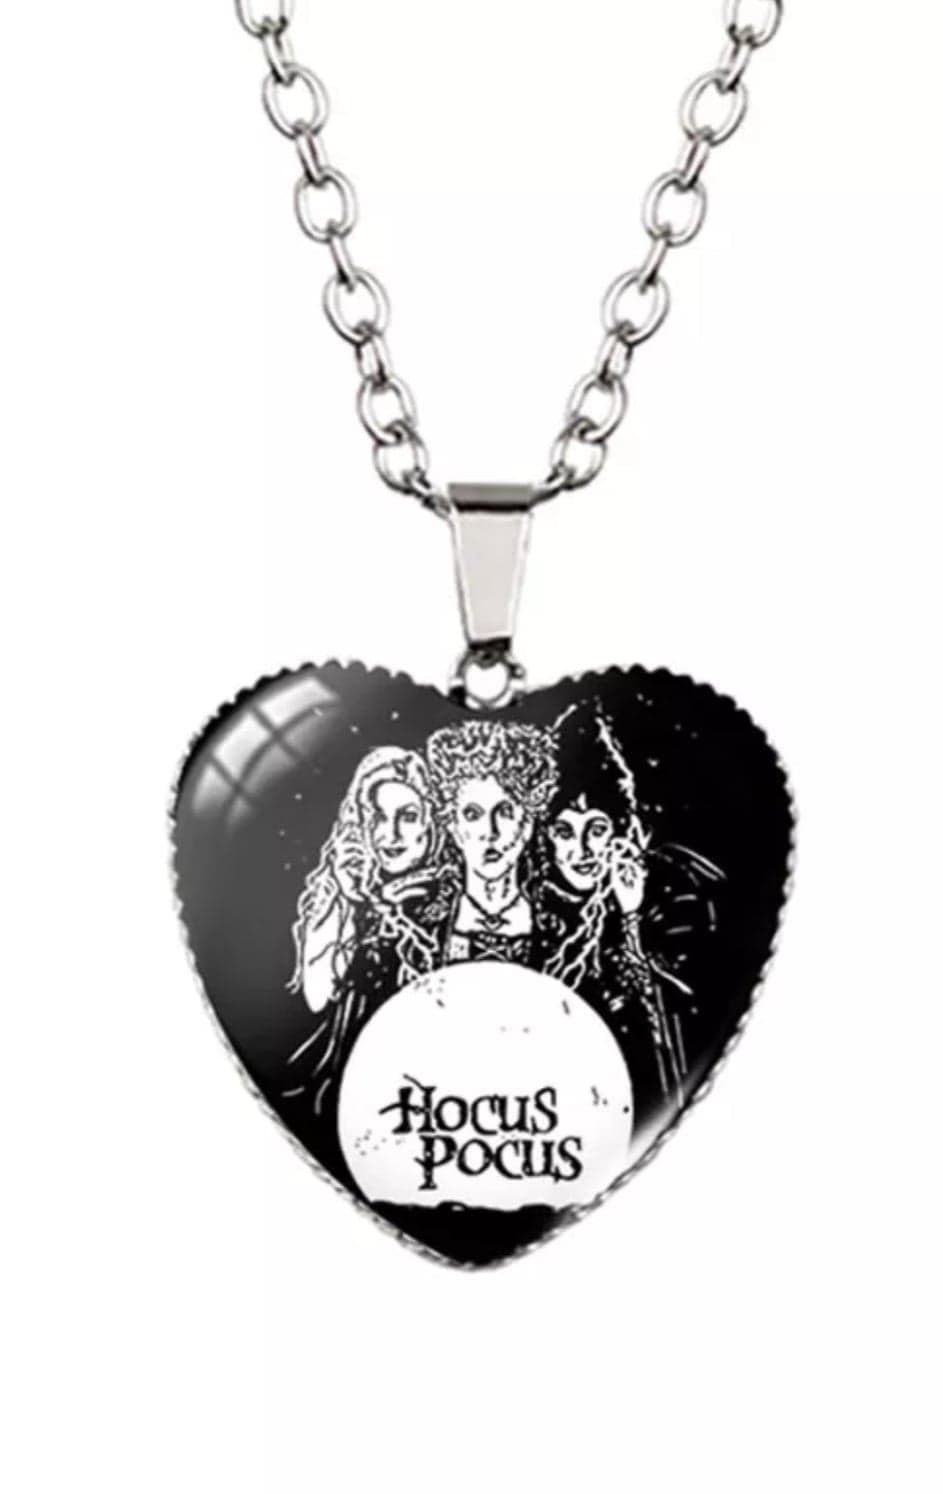 Earrings Necklace And Tooth Cap Set Cosplay Accessories For Winifred  Sanderson Hocus Pocus For Halloween | Fruugo MY